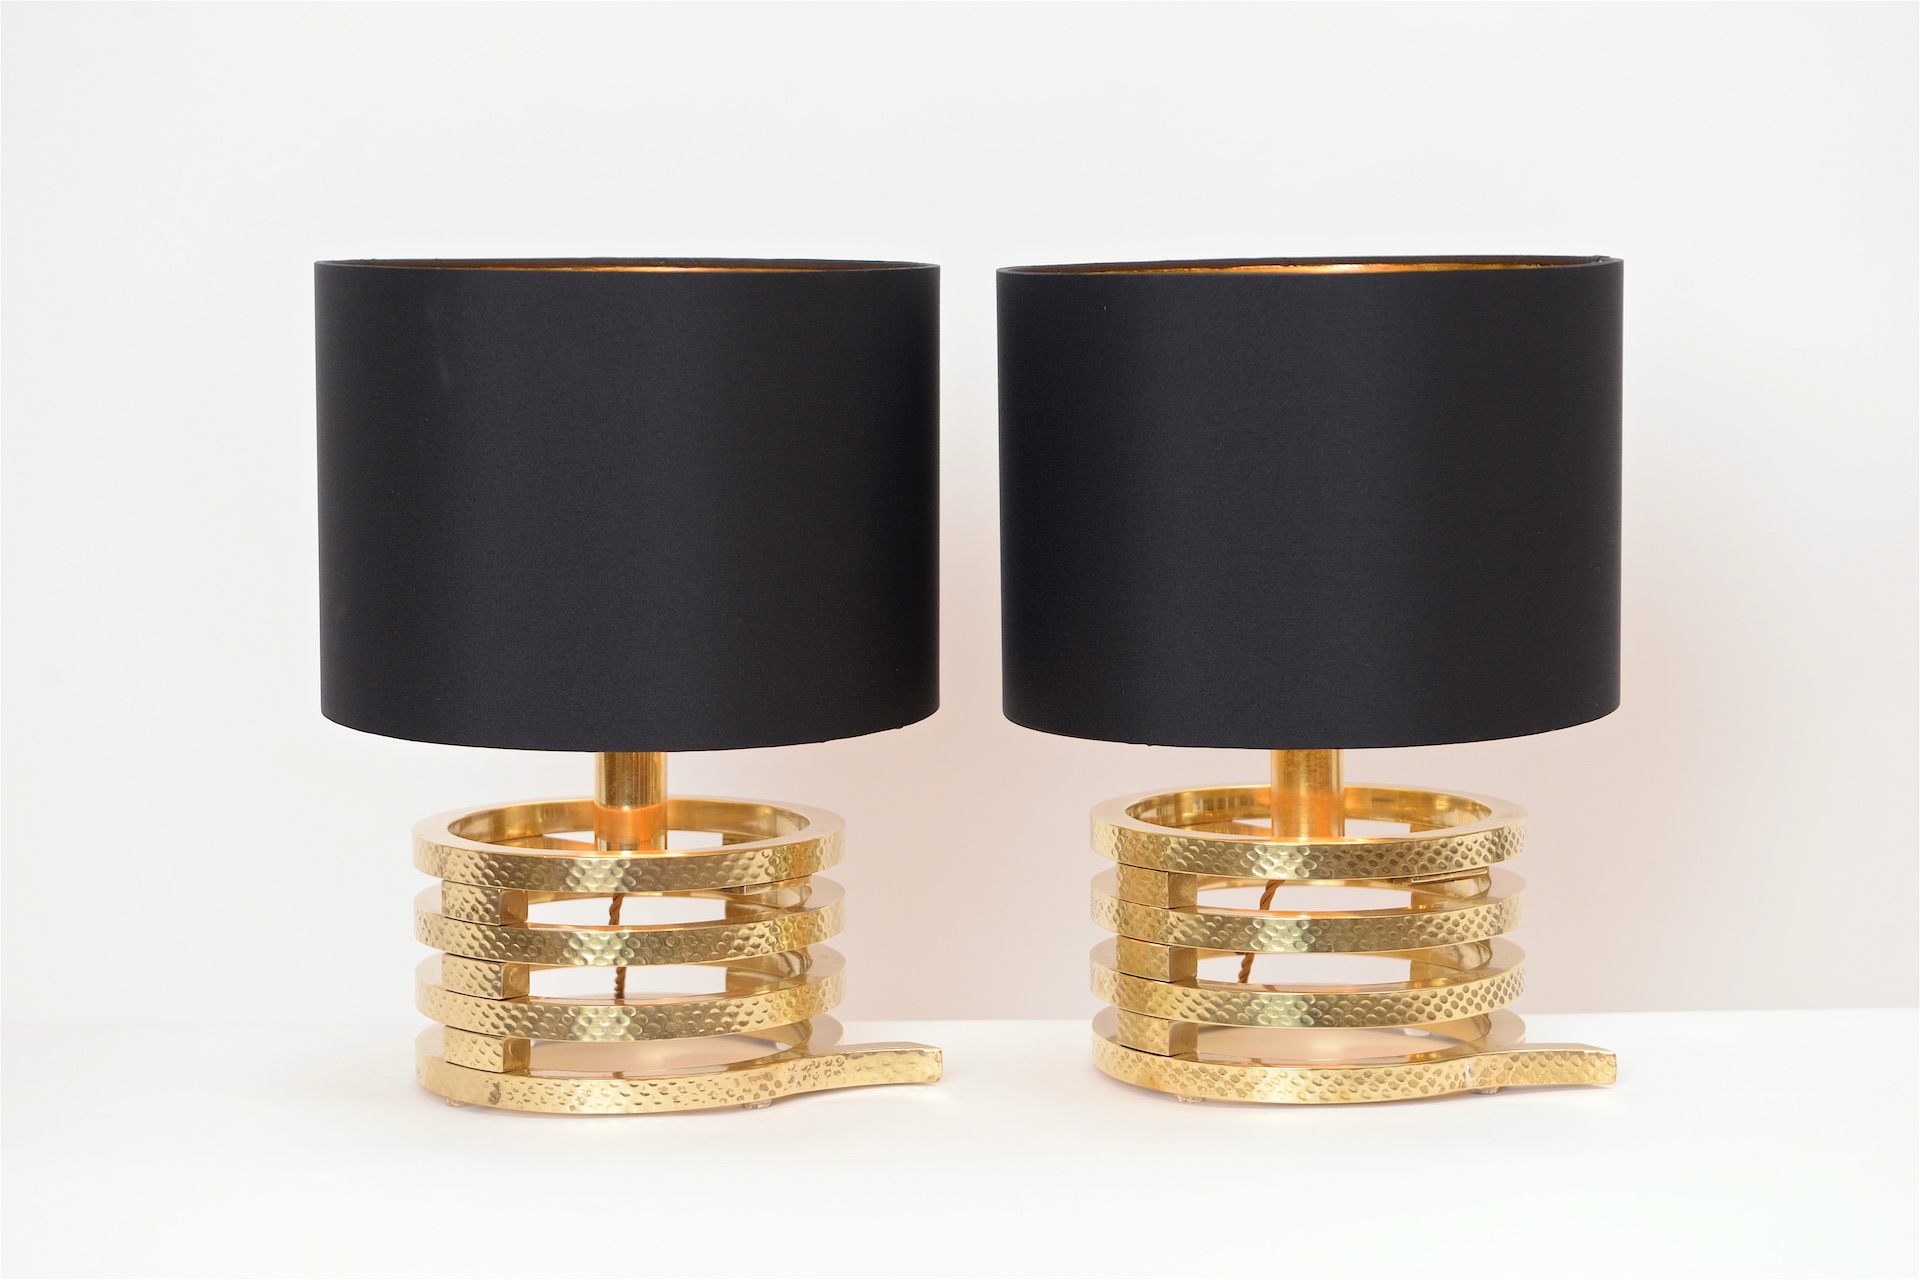 Pair of Solid Hammered Brass Table Lamps with Black Shades